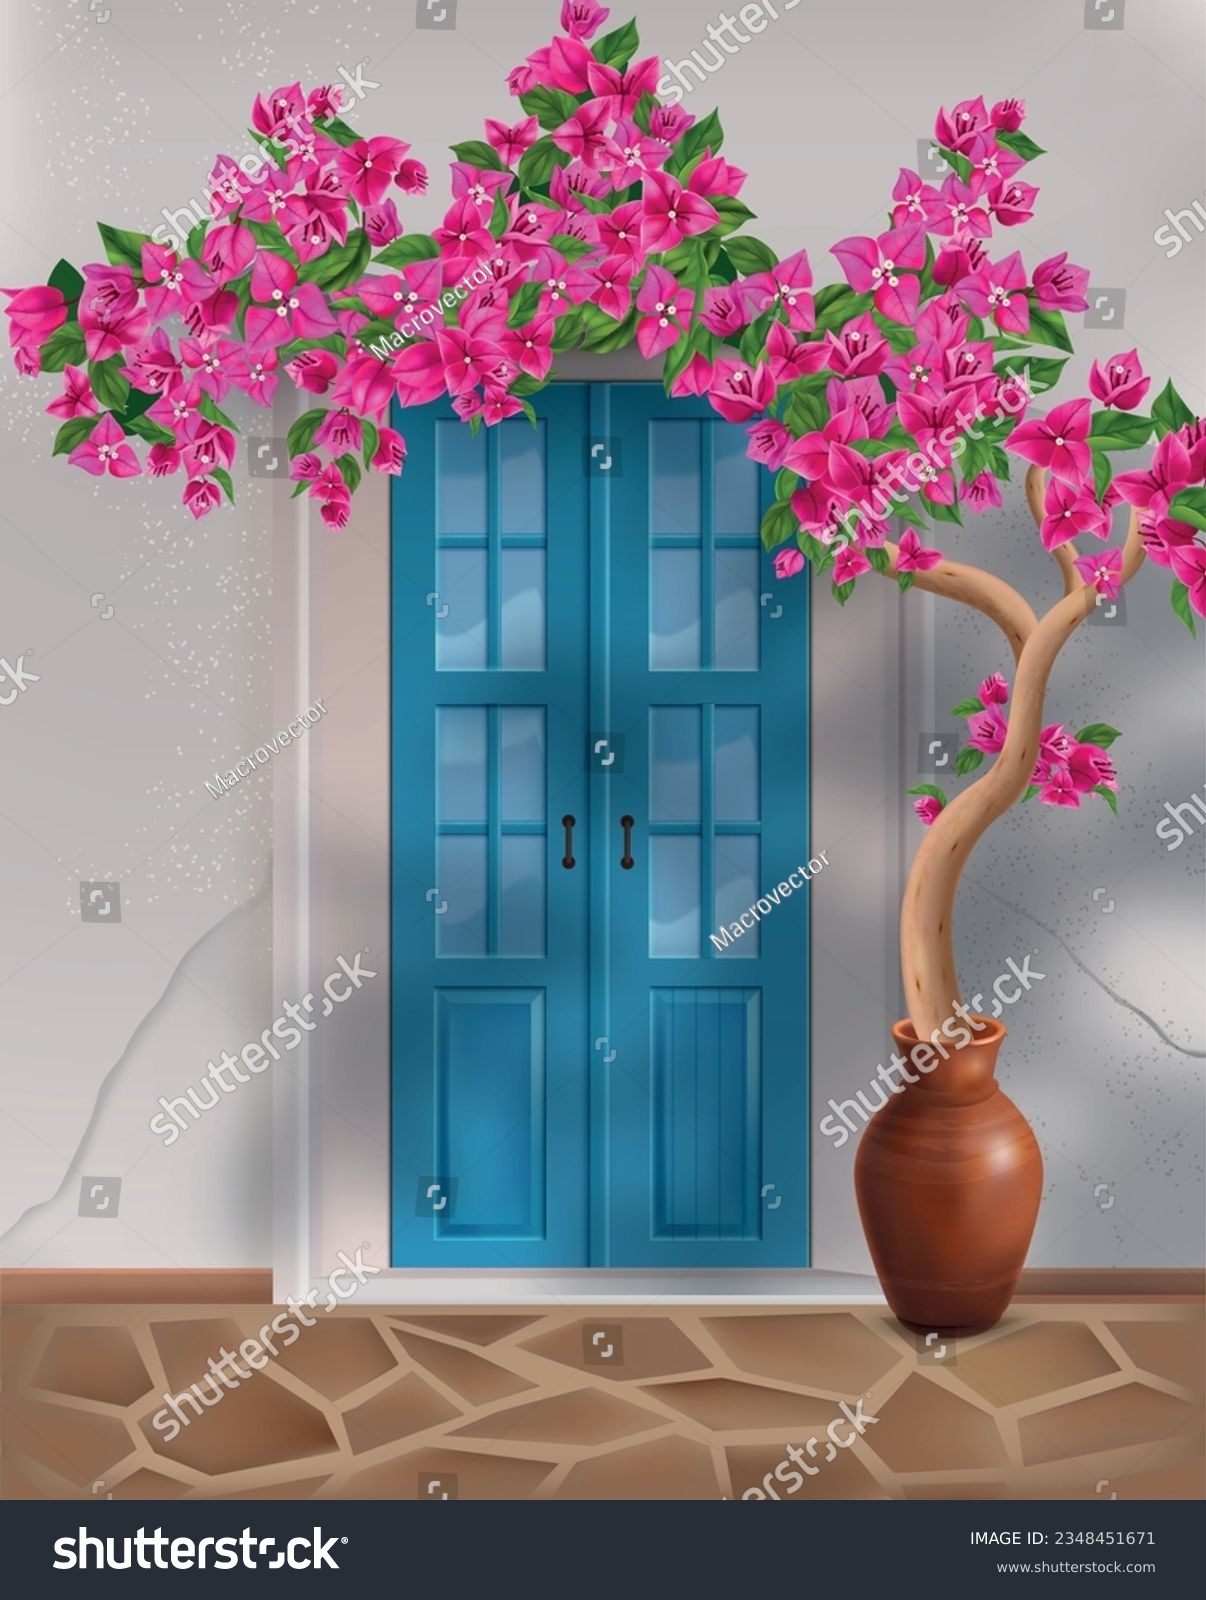 SVG of Bougainvillea tree growing in clay pot next to front door of house realistic composition vector illustration svg